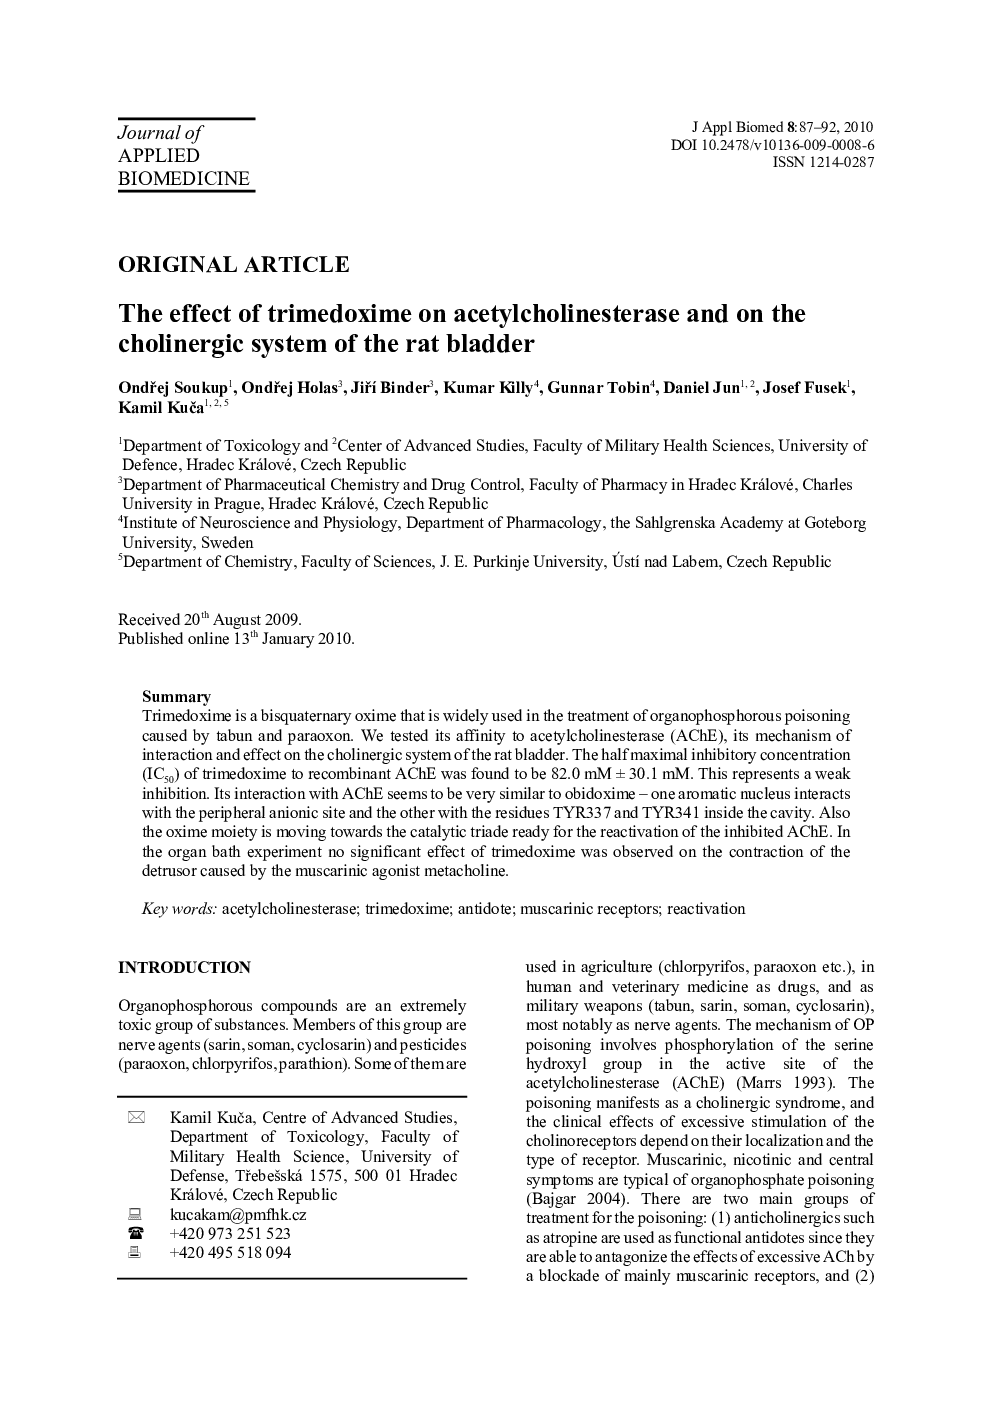 The effect of trimedoxime on acetylcholinesterase and on the cholinergic system of the rat bladder 